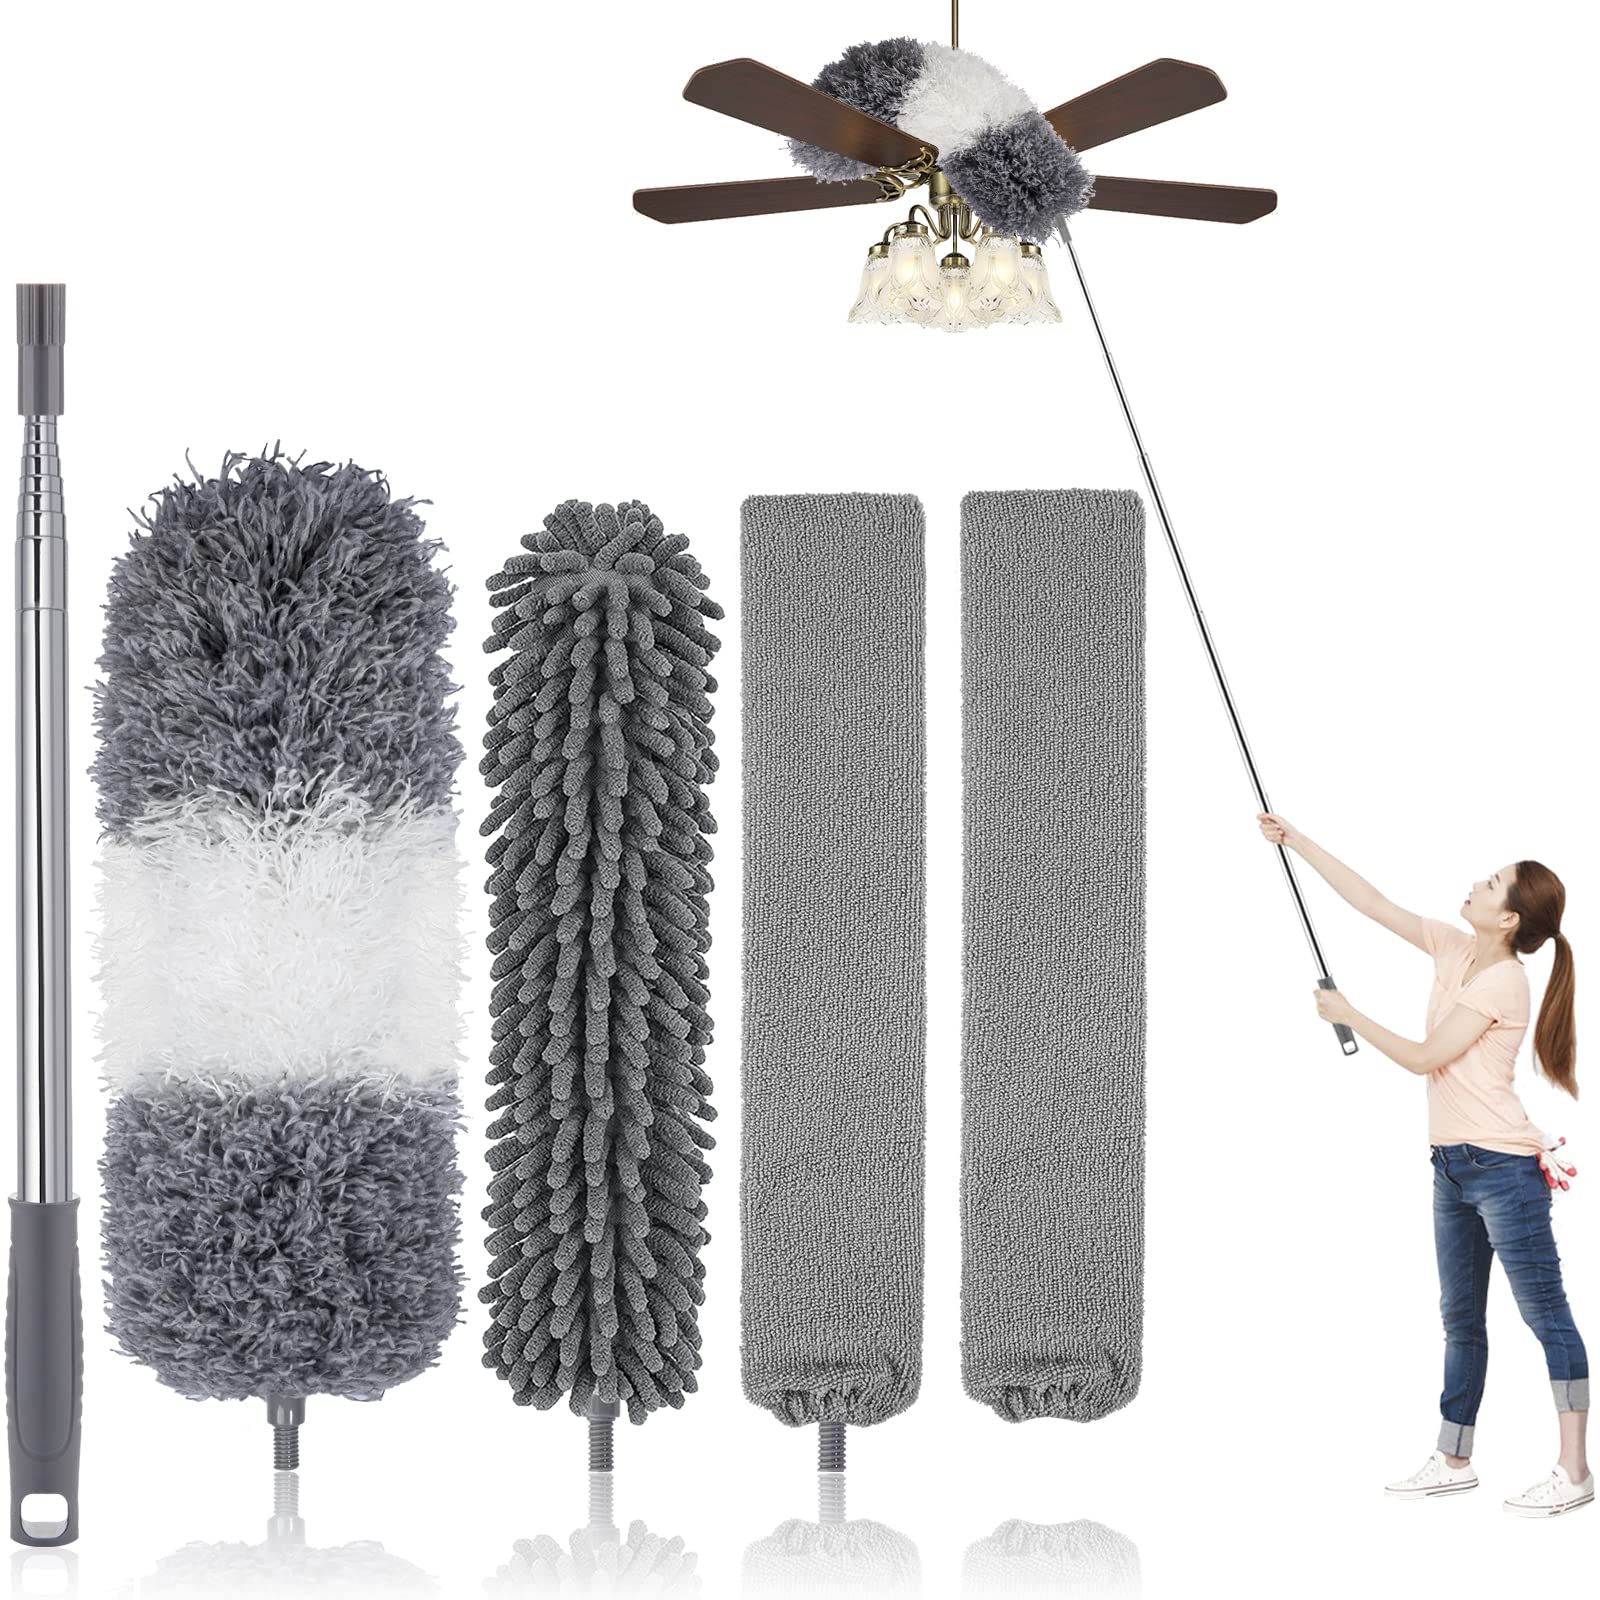 PAIKON Retractable Gap Dust Cleaner, Washable Duster with Extension Pole  30'' to 92.5'', Dusting Tools with Microfiber Feather Duster,Gap Dust